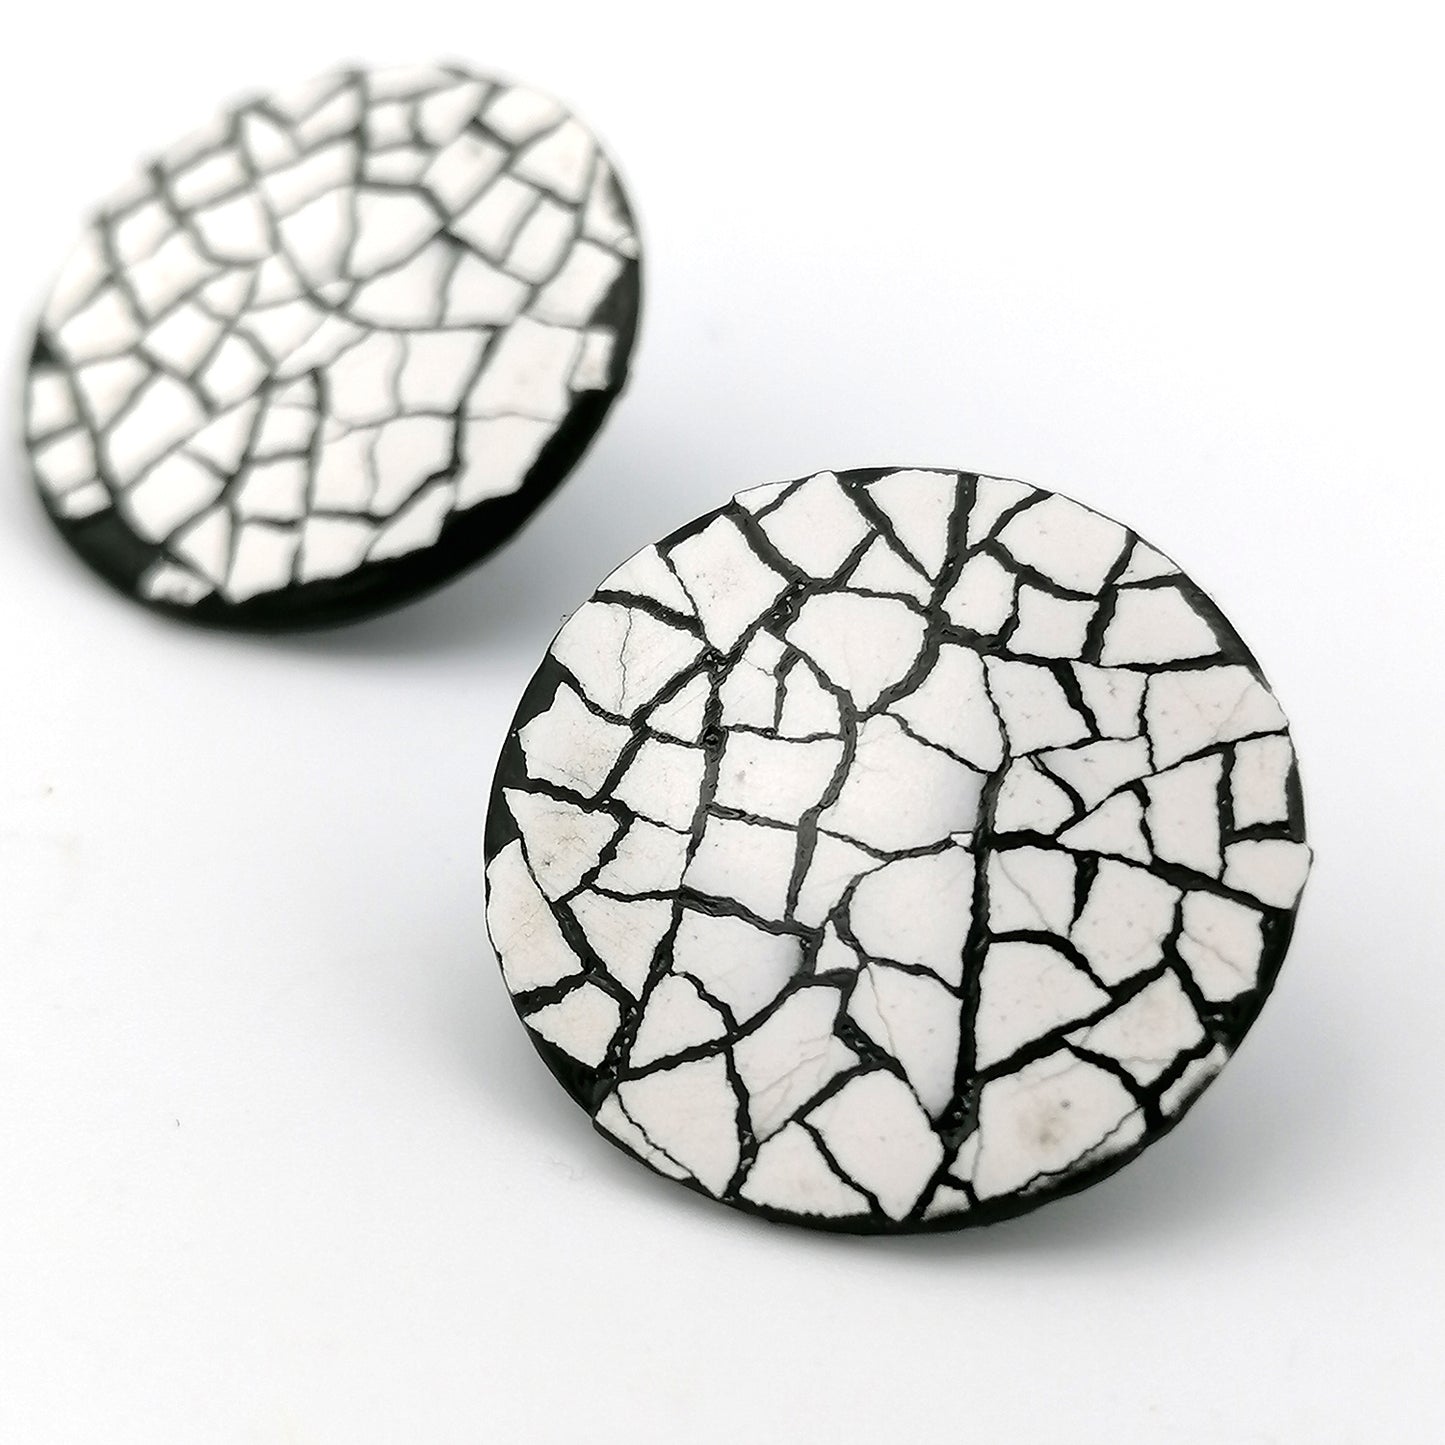 Image shows two midi modern mosaic circle stud earrings. the mosaic is made up of white real eggshell on layers of black lacquer.